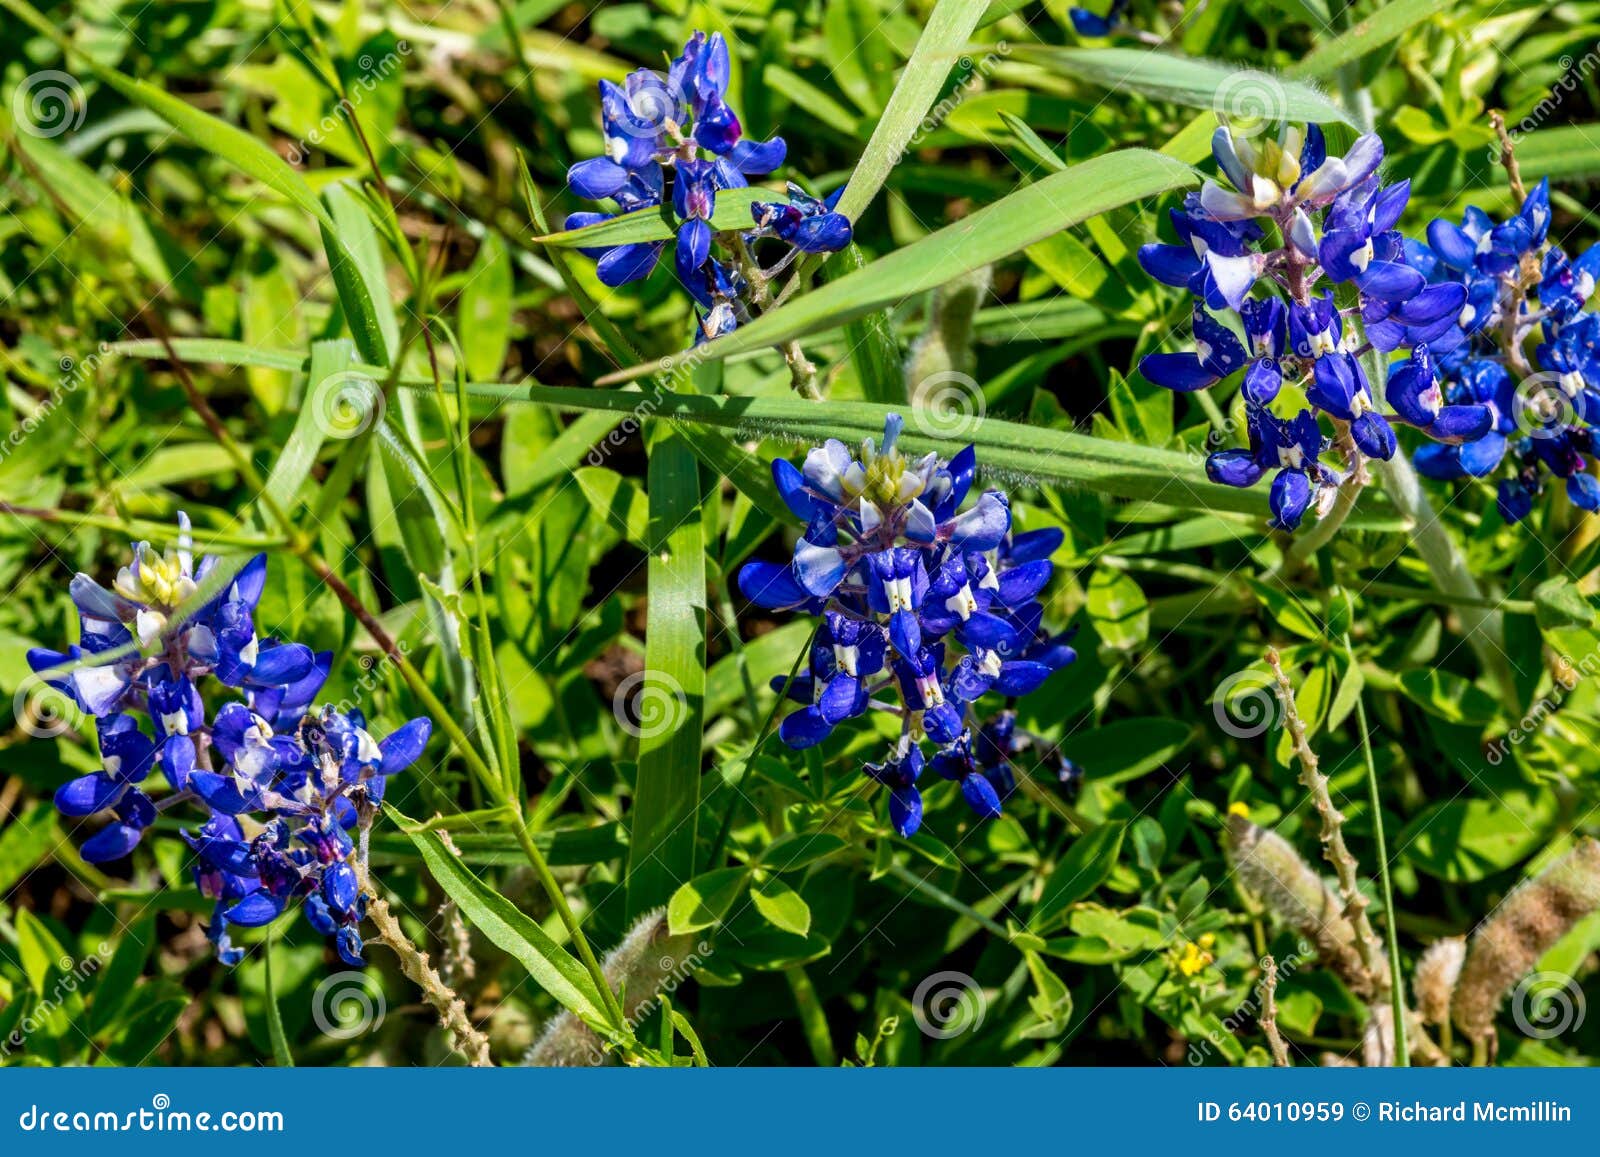 closeup view of famous texas bluebonnet (lupinus texensis) wildflowers